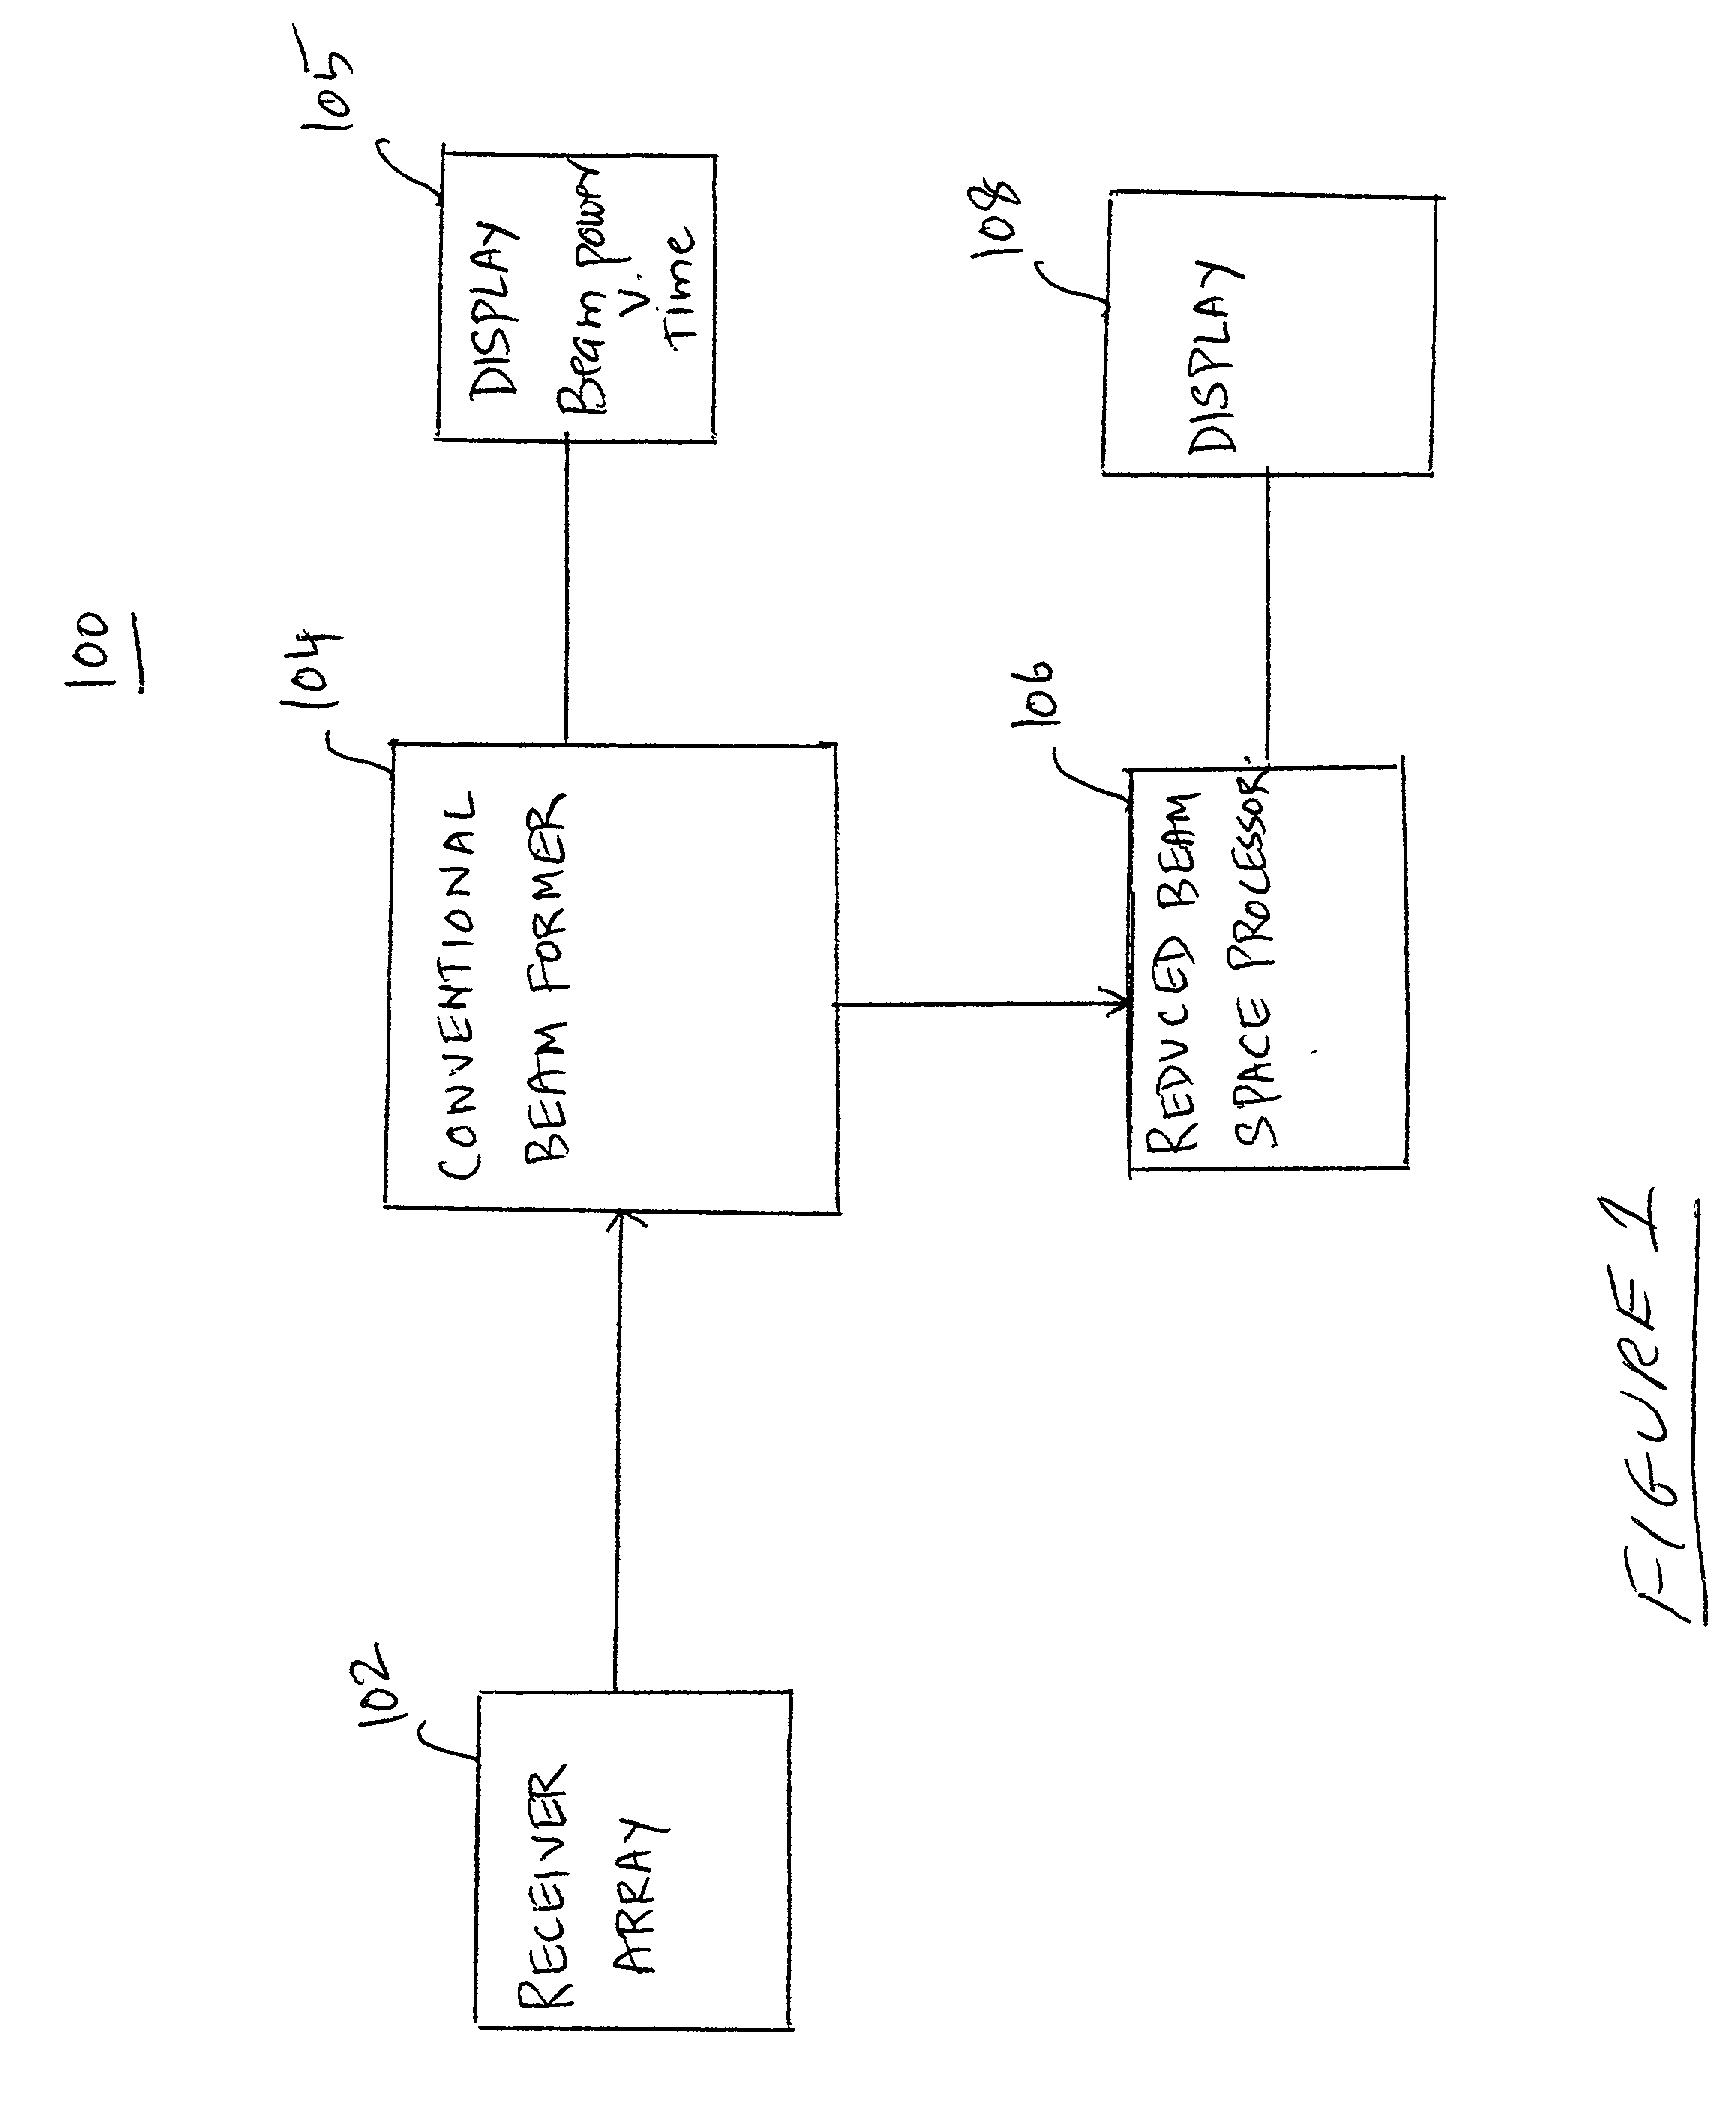 Method and apparatus for passive acoustic imaging using a horizontal line array